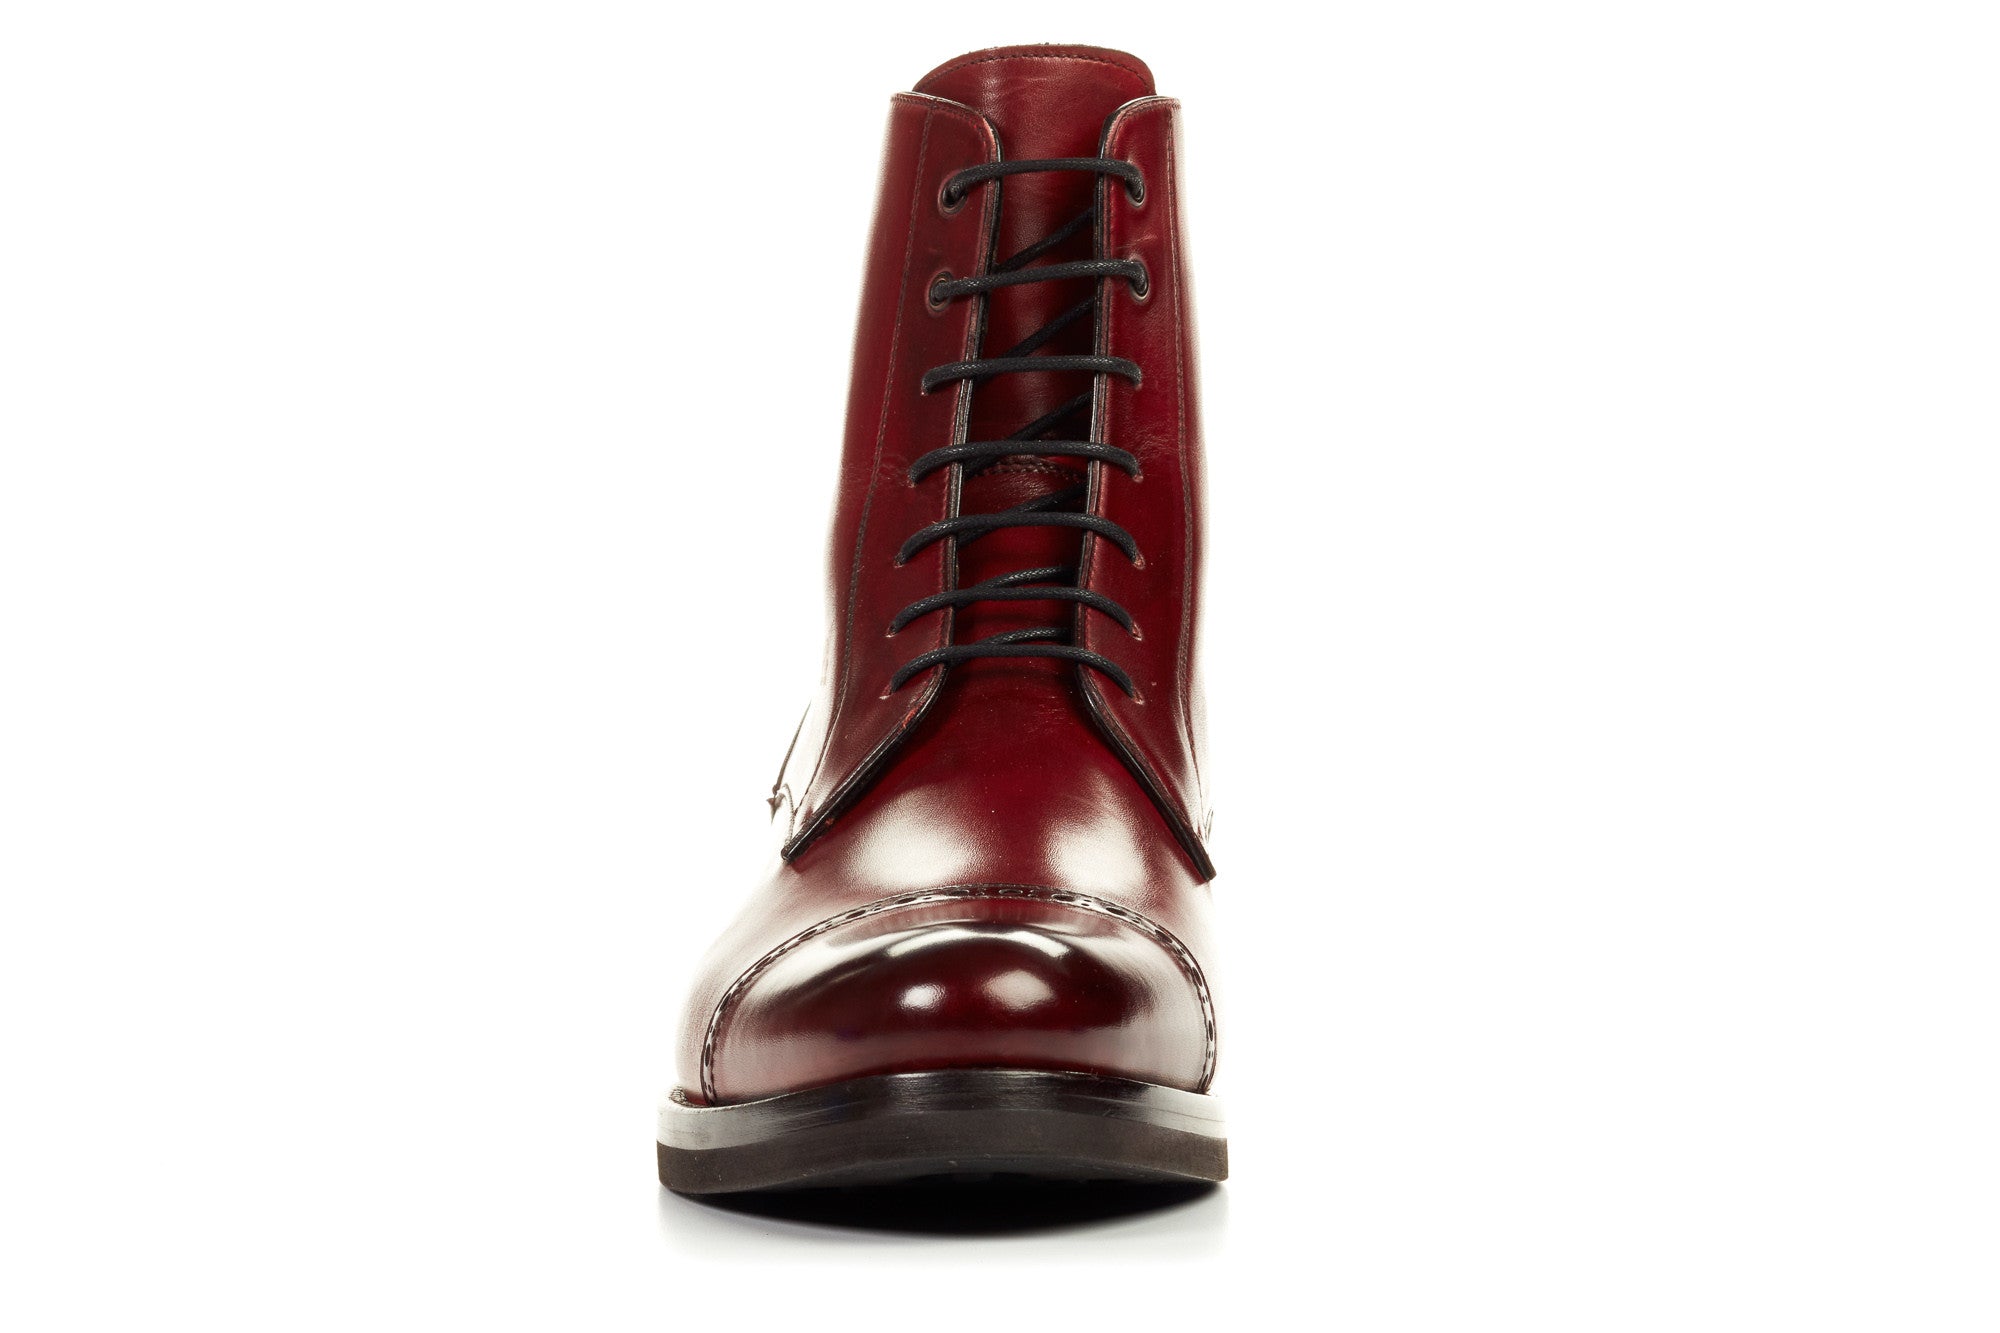 The Presley Lace-Up Boot - Oxblood - Rubber Sole